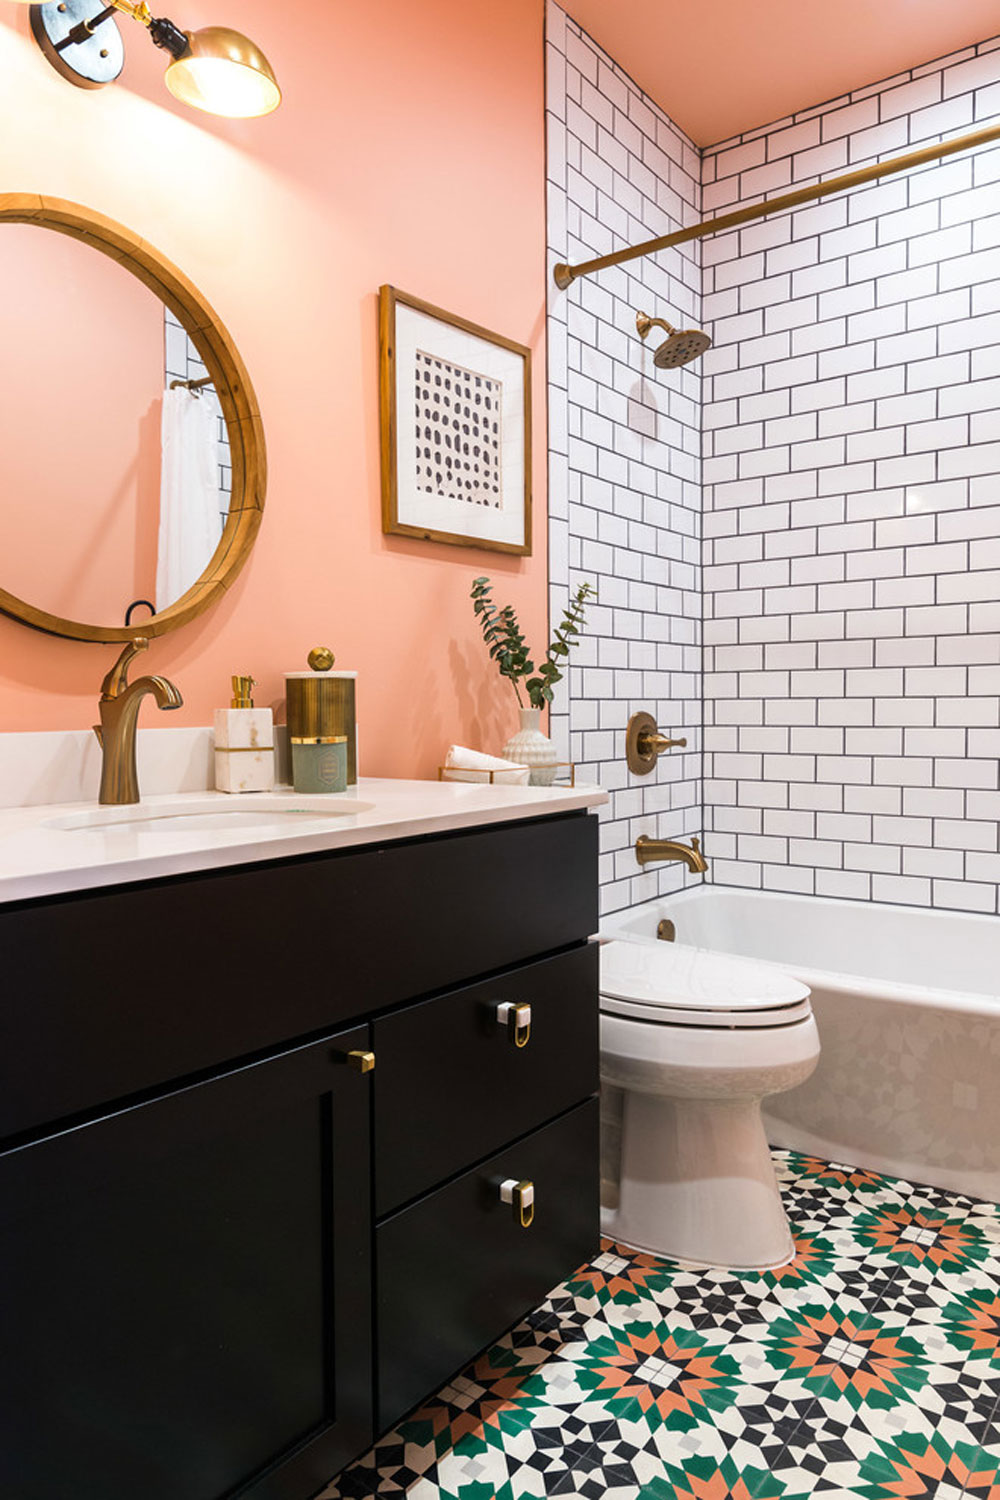 Capitol-Hill-Bathroom-by-Lisa-Leroy Use the peach color to decorate amazing interiors